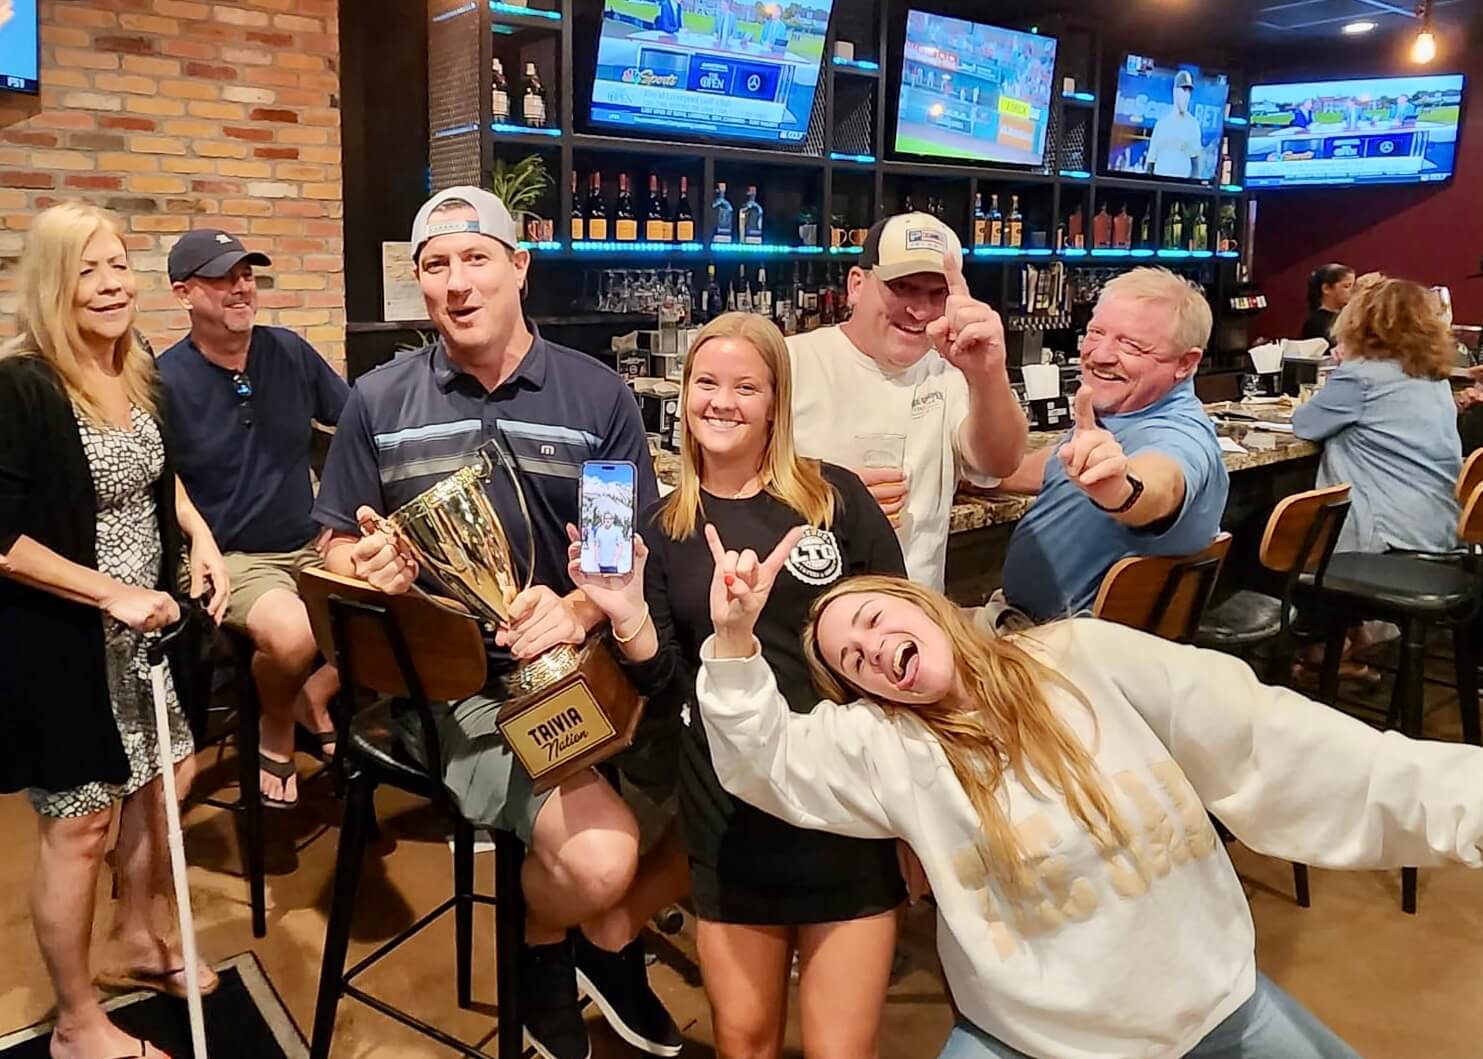 Legends Tavern & Grille Palm Beach Gardens FL 33418 trivia night: group of adults having fun in front of a bar with a man in the middle holding a Trivia Nation trophy and a woman in front making a silly face while two other men hold up their hands making a "number one" sign